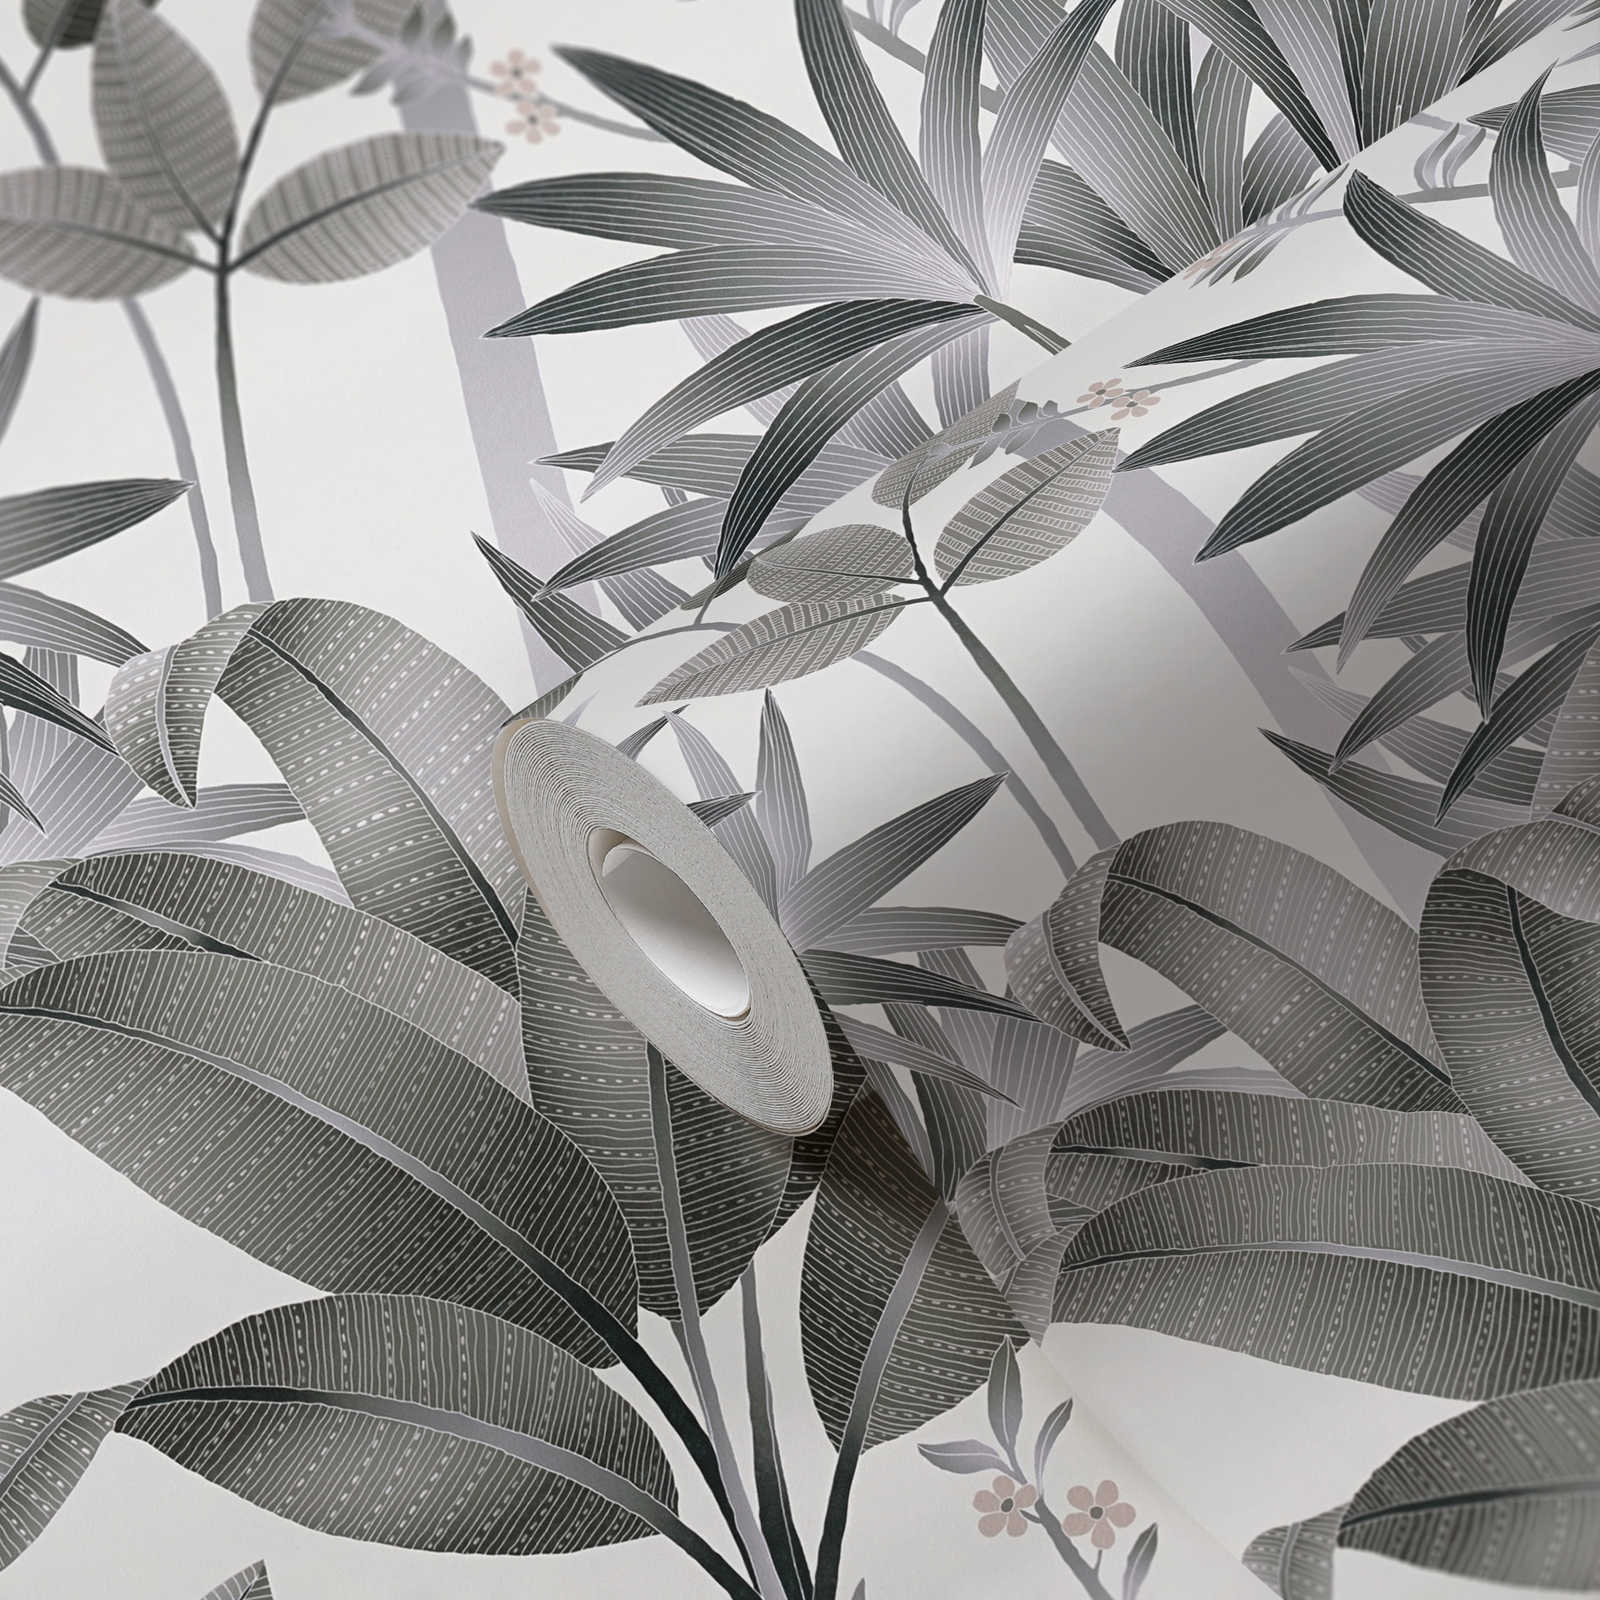             Floral non-woven wallpaper with leaf pattern - grey, black, white
        